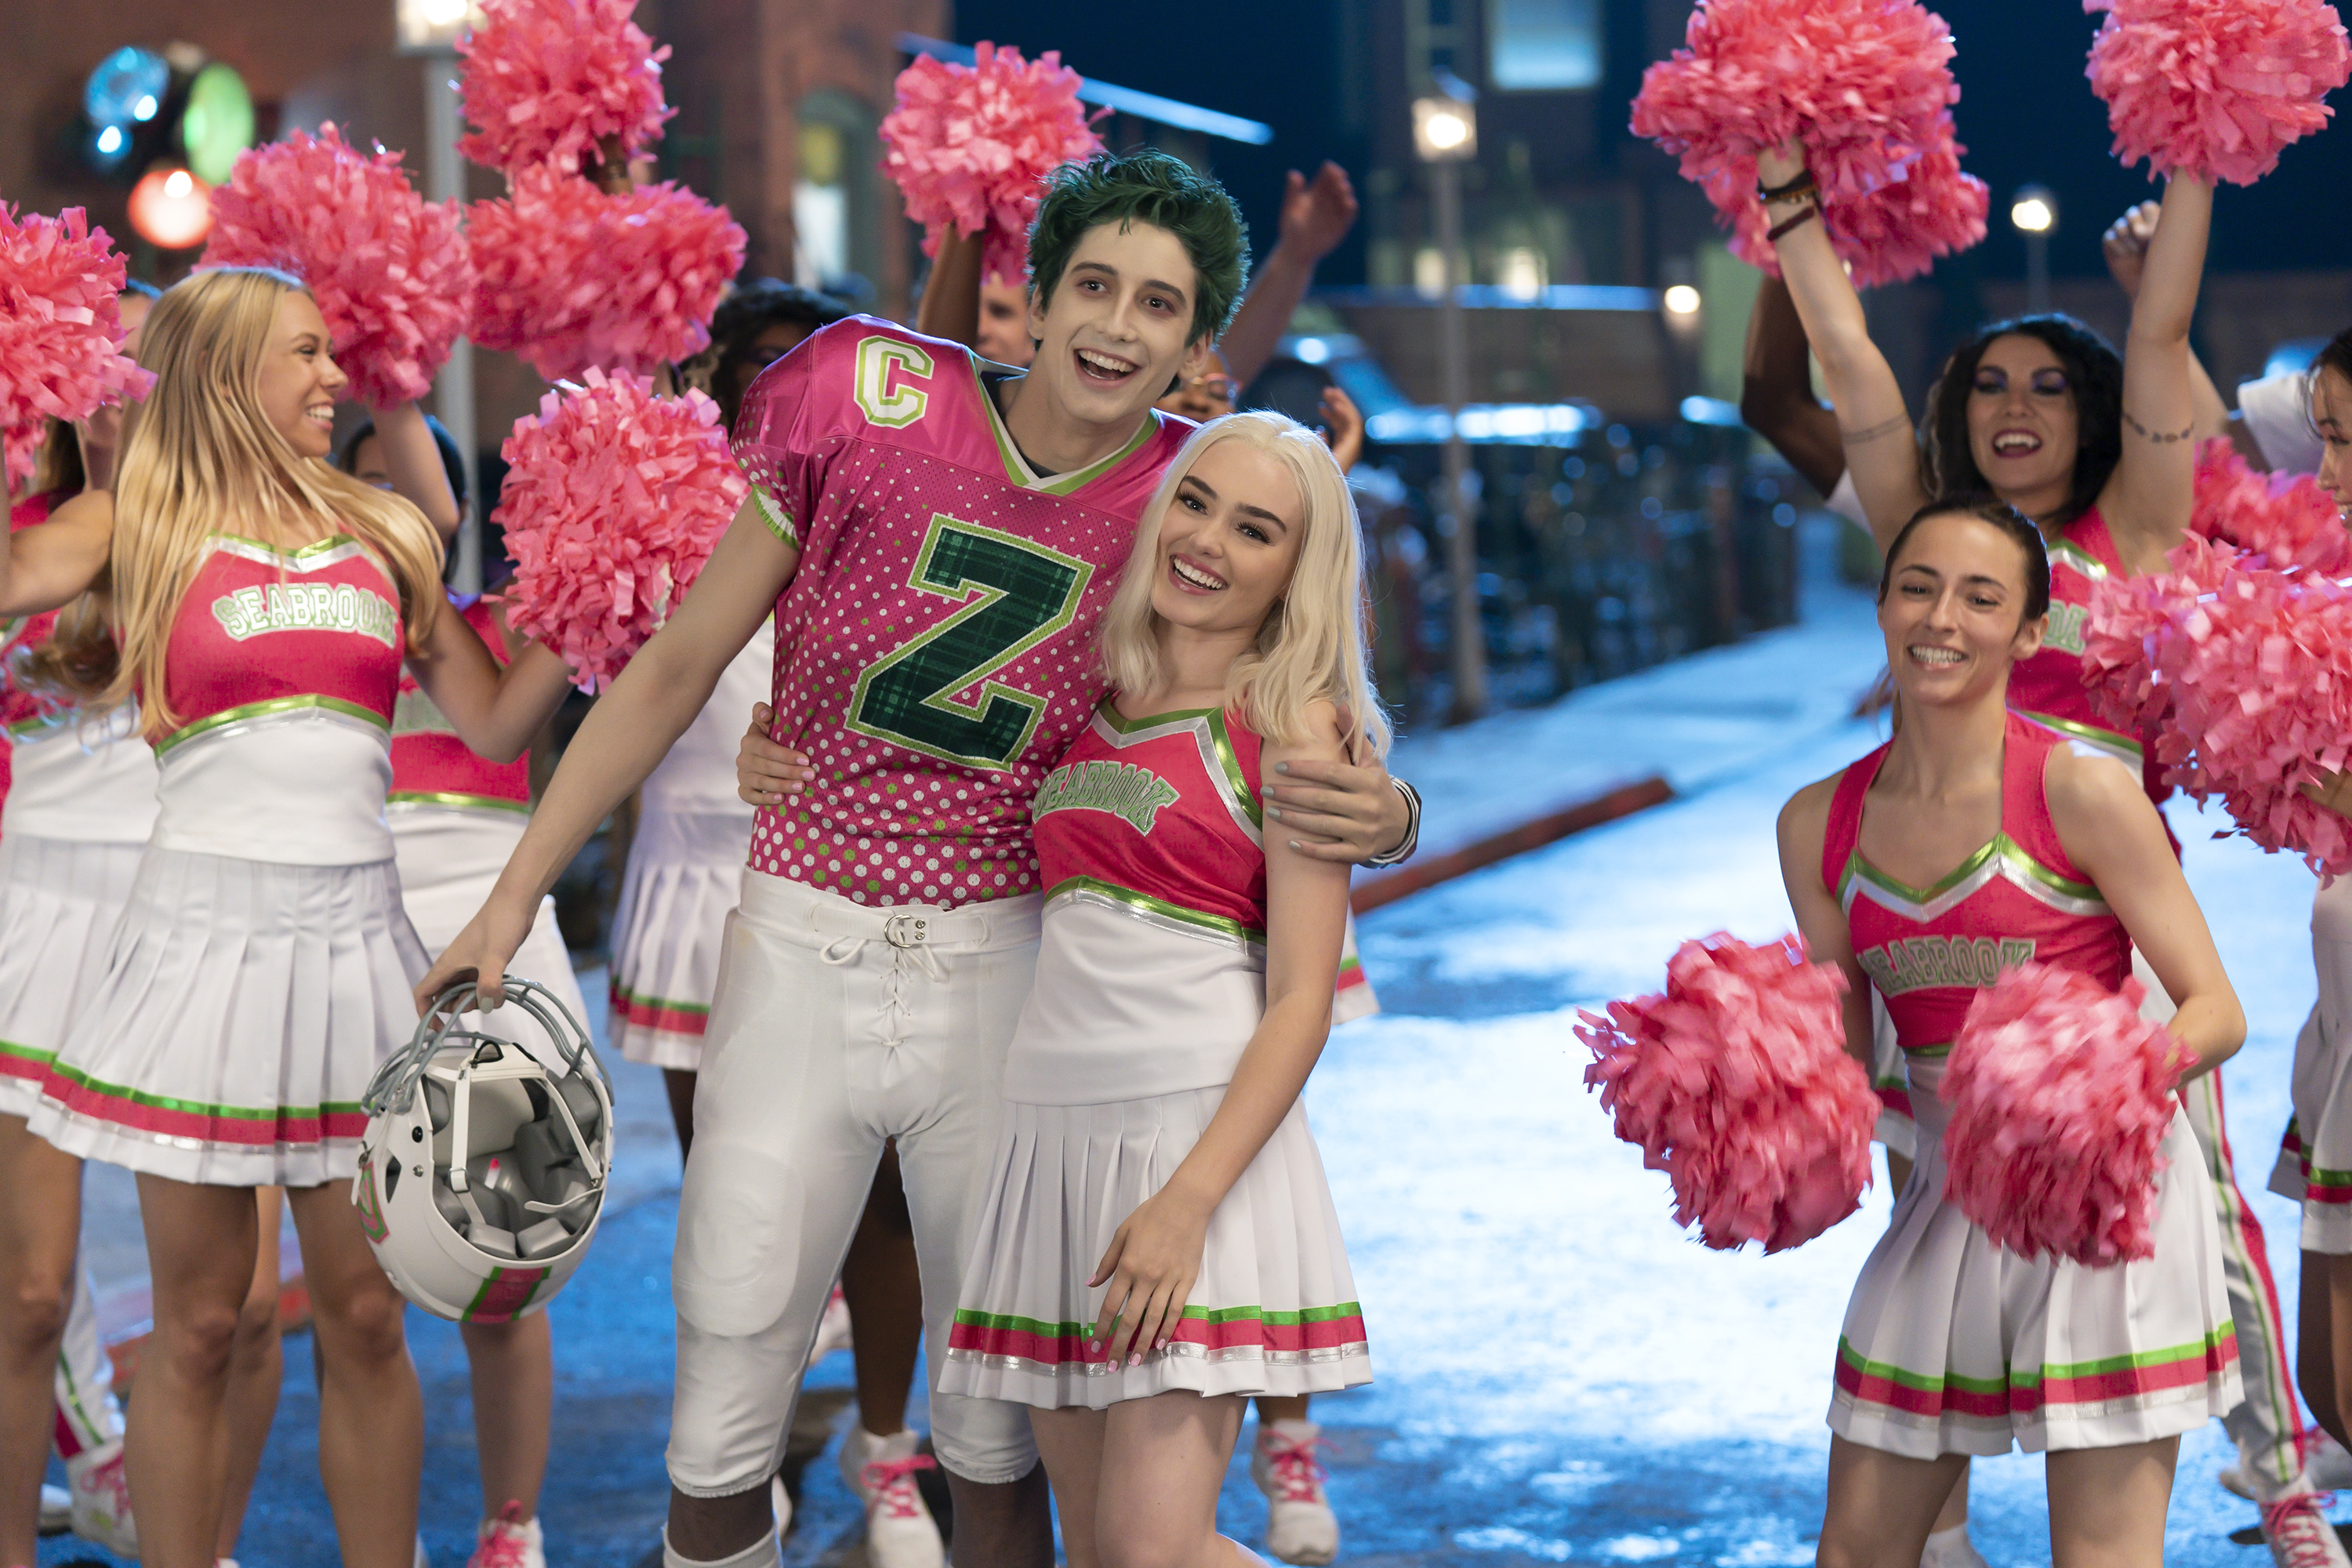 Zombies 3' Review: Take Me to Your Cheerleader - The New York Times